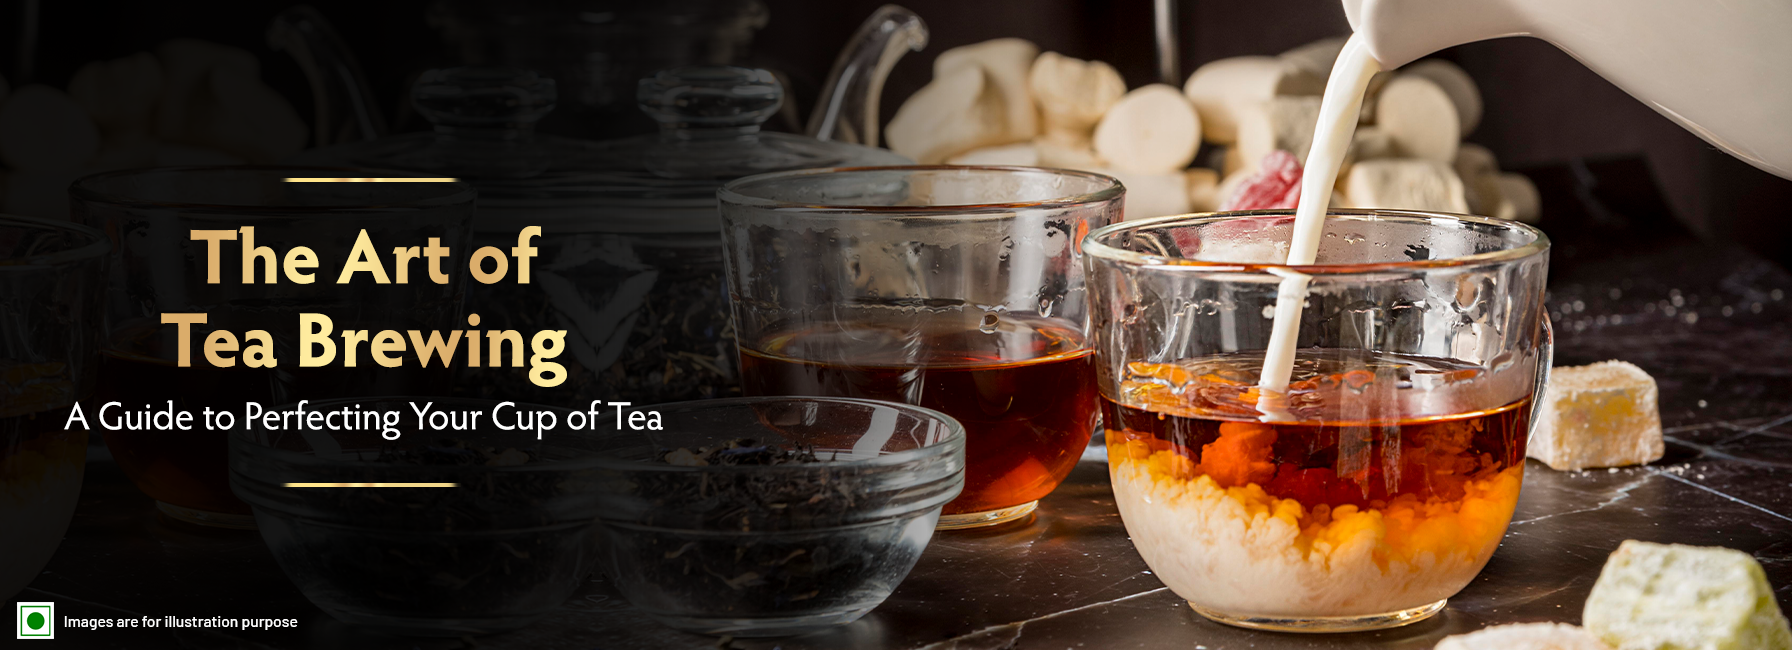 The Art of Tea Brewing: A Guide to Perfecting Your Cup of Tea